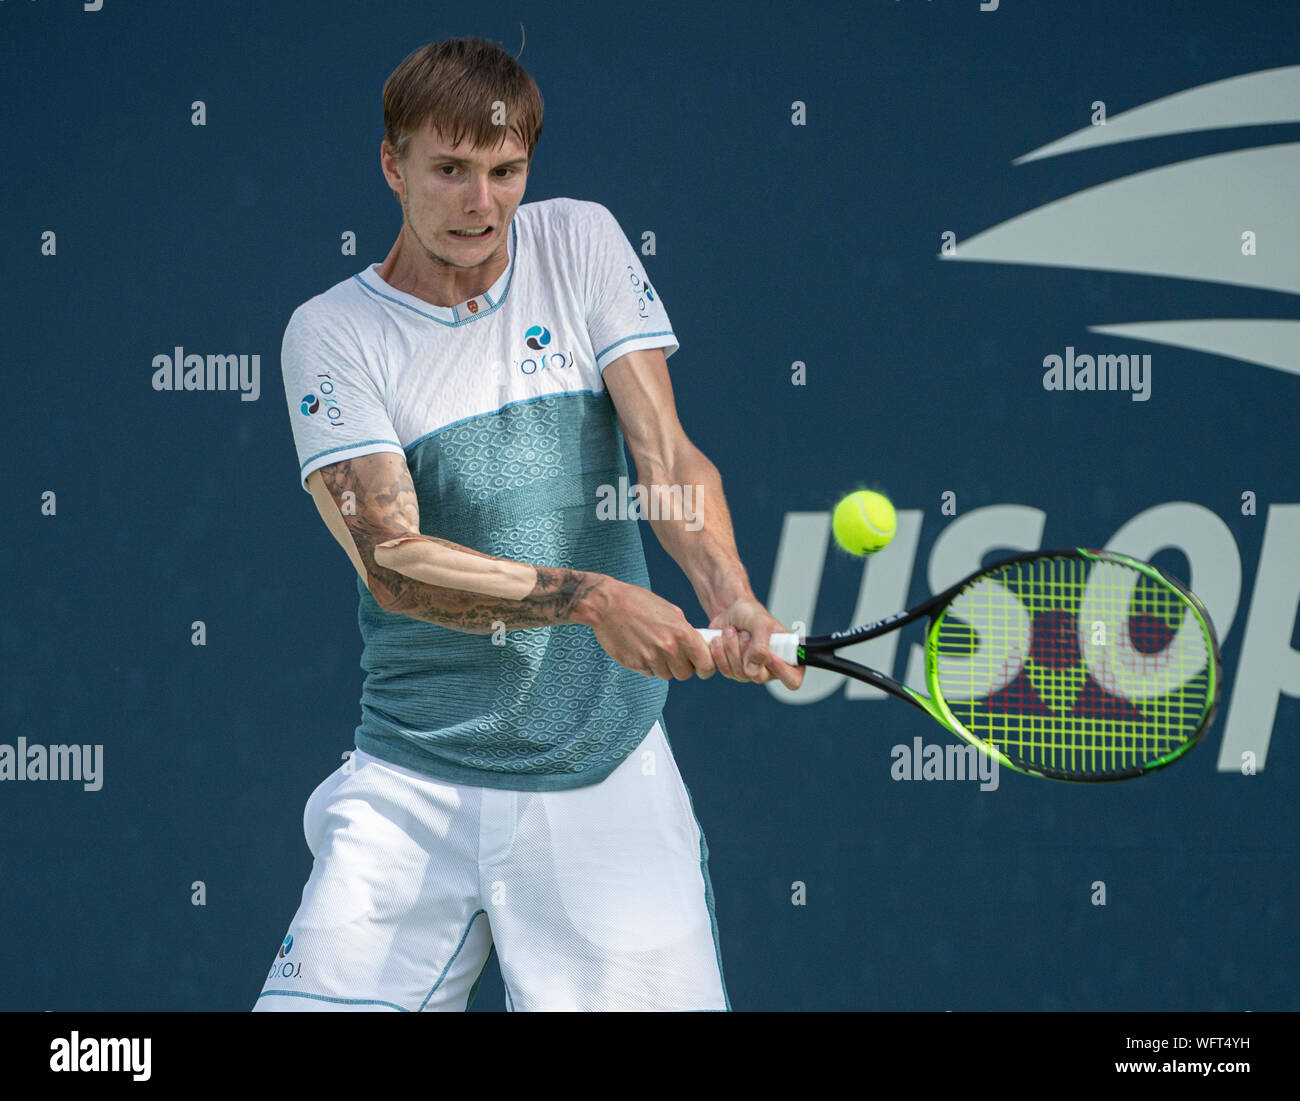 New York, USA. 31st Aug, 2019. August 31, 2019: Alexandre Bublik (KAZ) loses to Pablo Andujar (ESP) 6-4, 6-3, 6-2, at the US Open being played at Billie Jean King National Tennis Center in Flushing, Queens, NY. Credit: Cal Sport Media/Alamy Live News Stock Photo